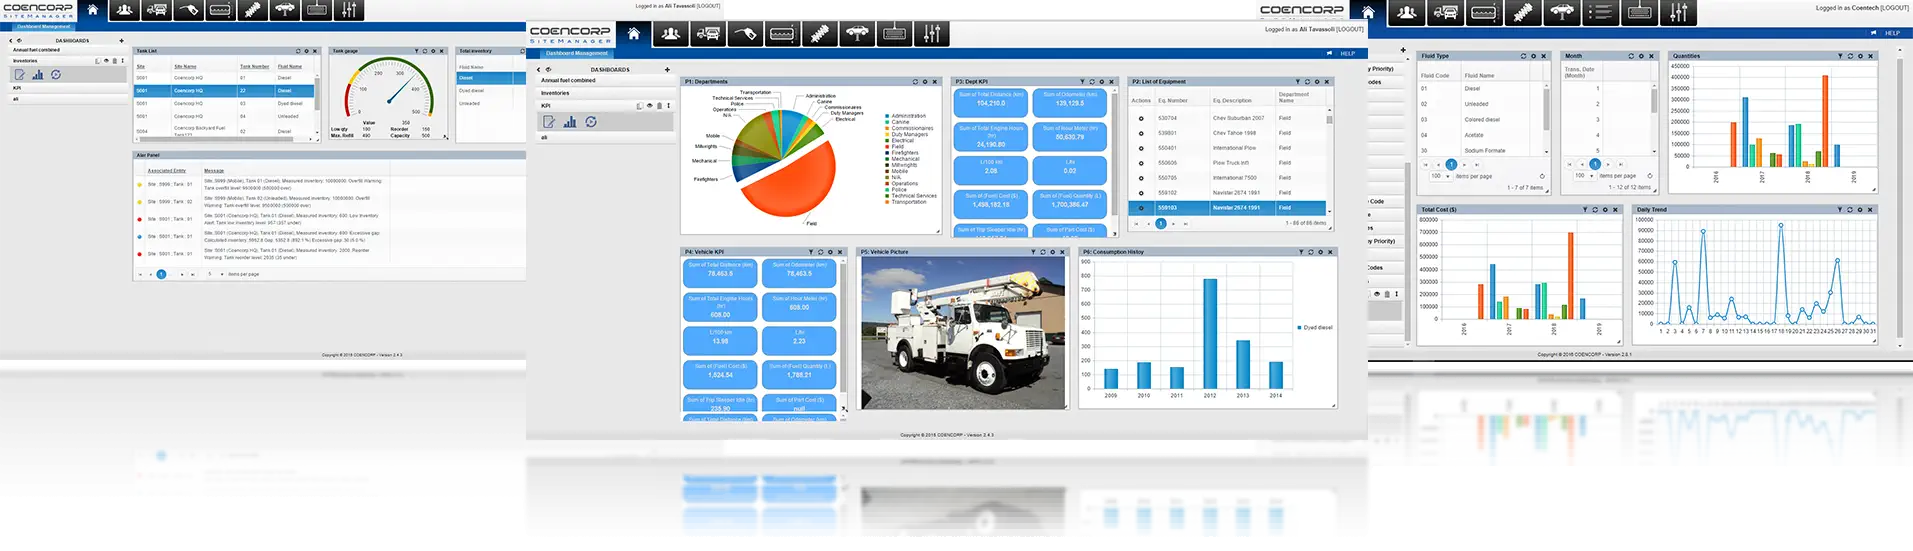 fleet-security-management-software-reporting-dashboards